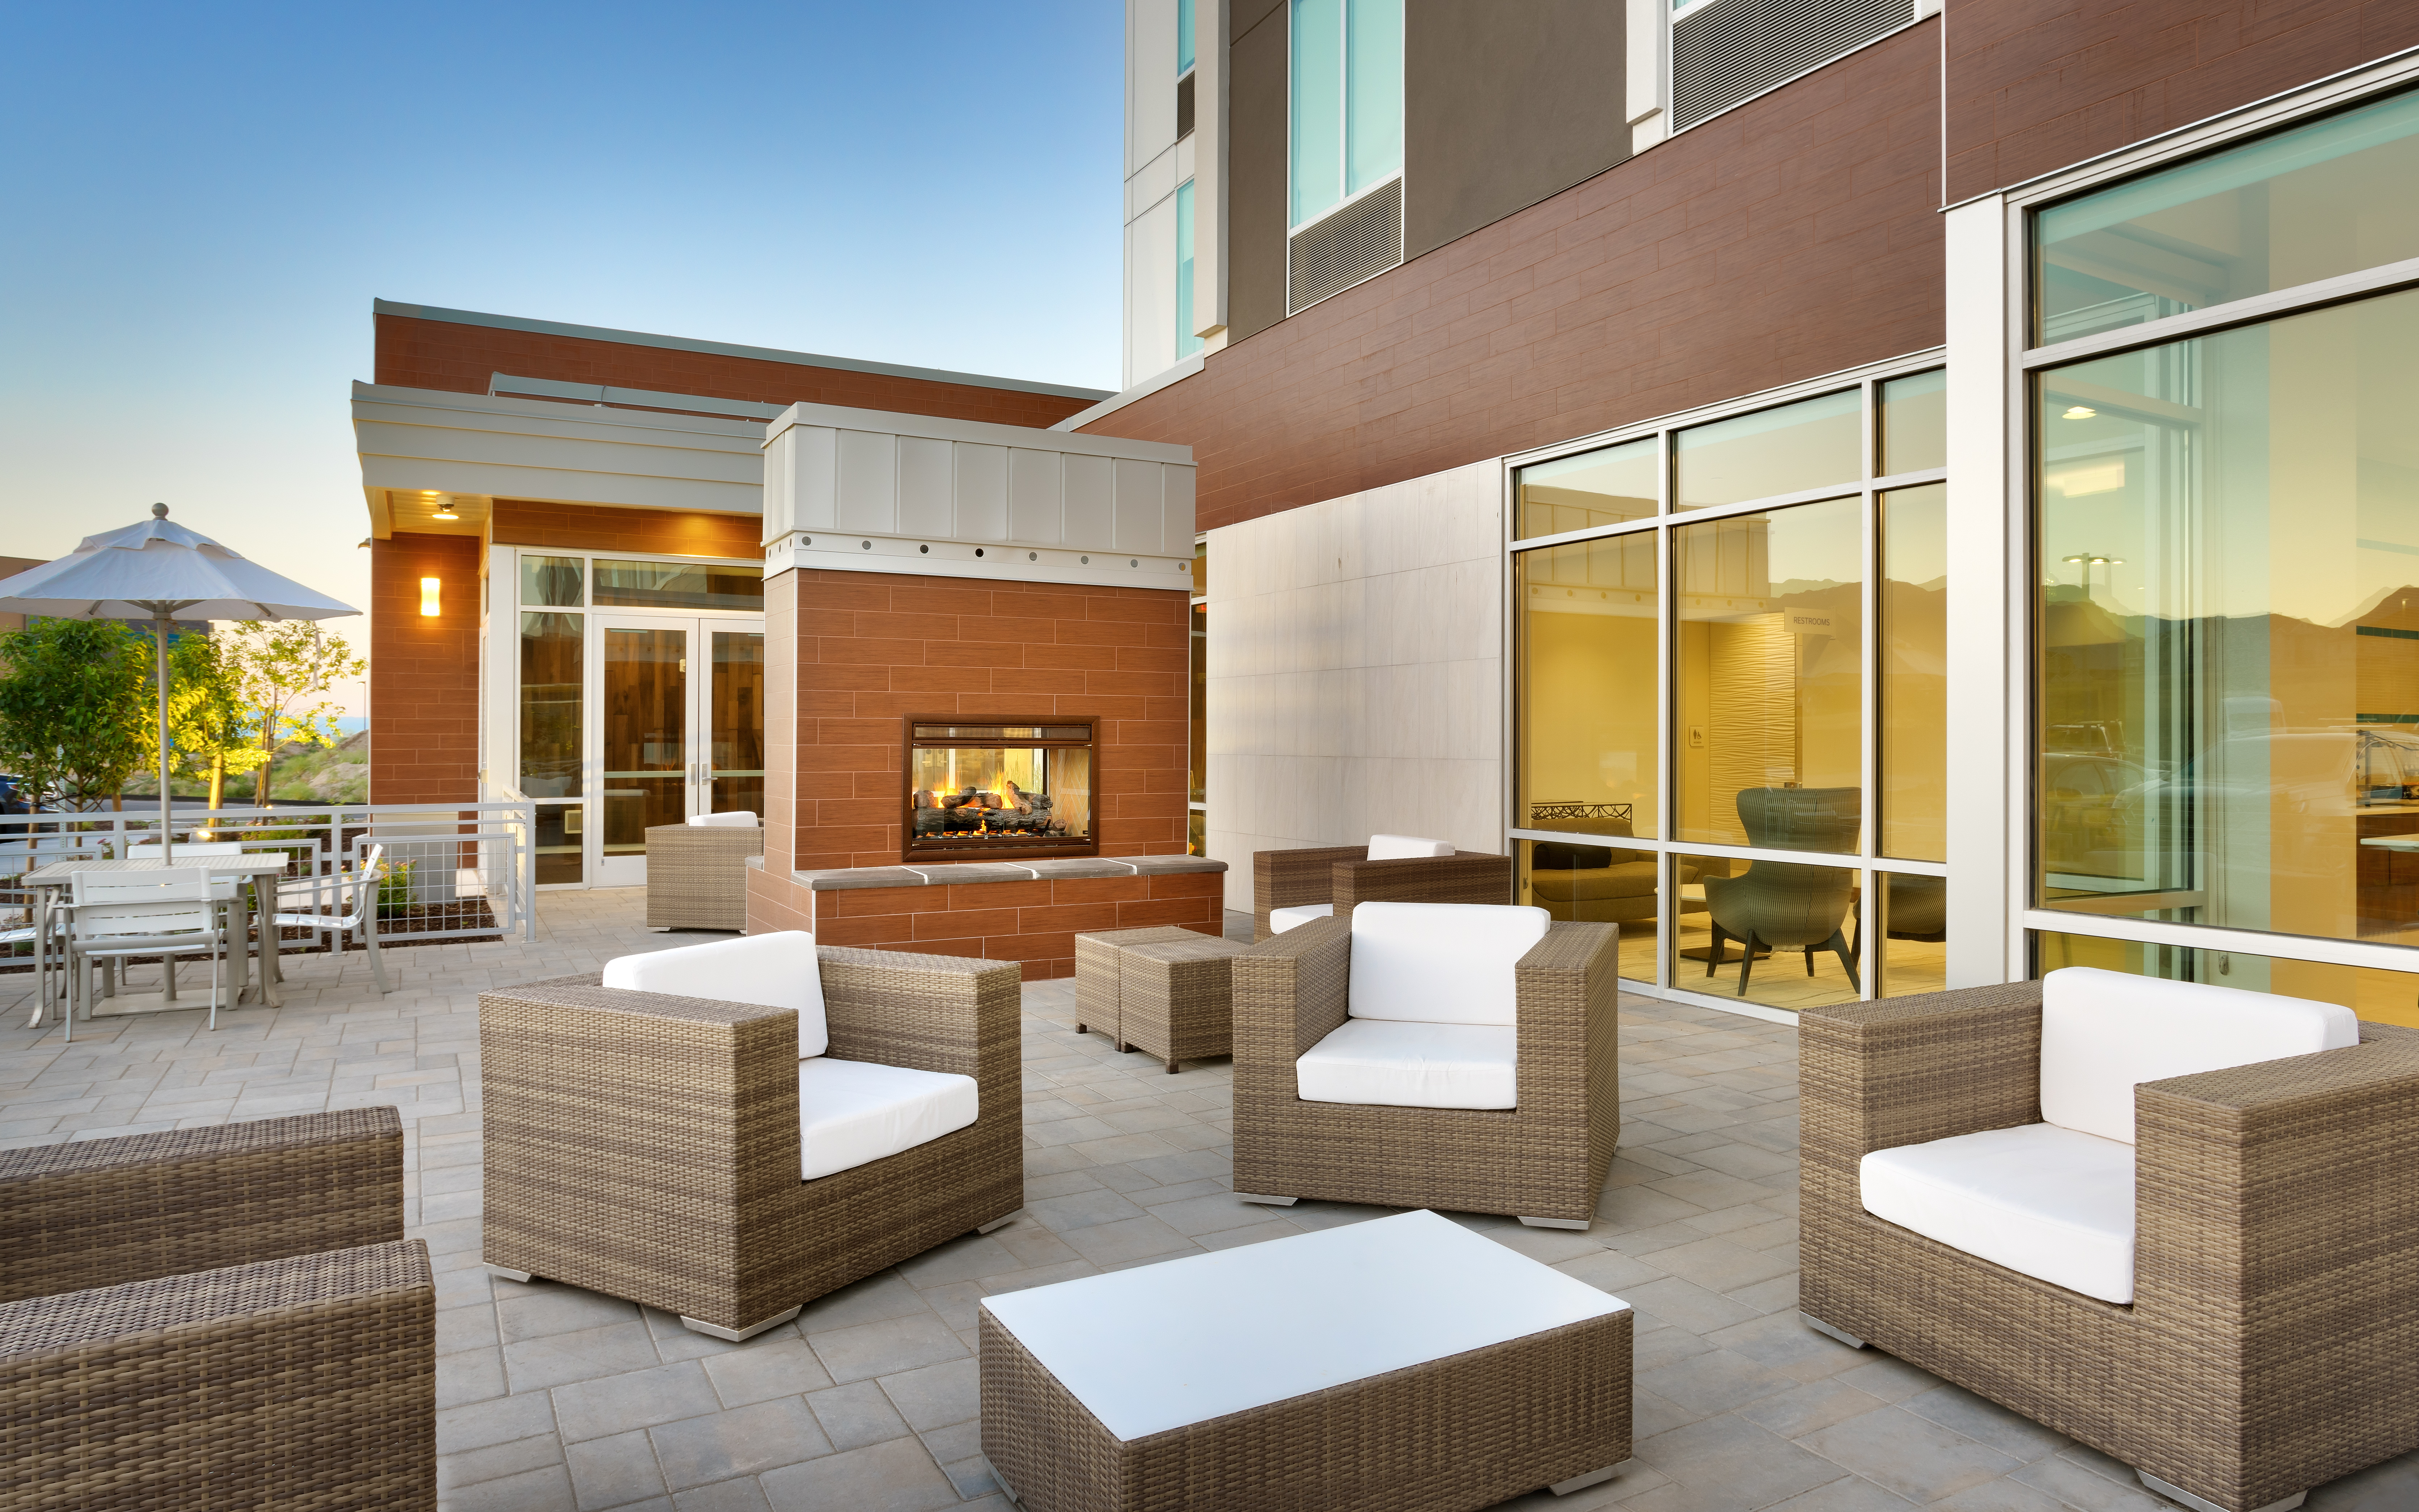 Outdoor Patio with Comfortable Seating